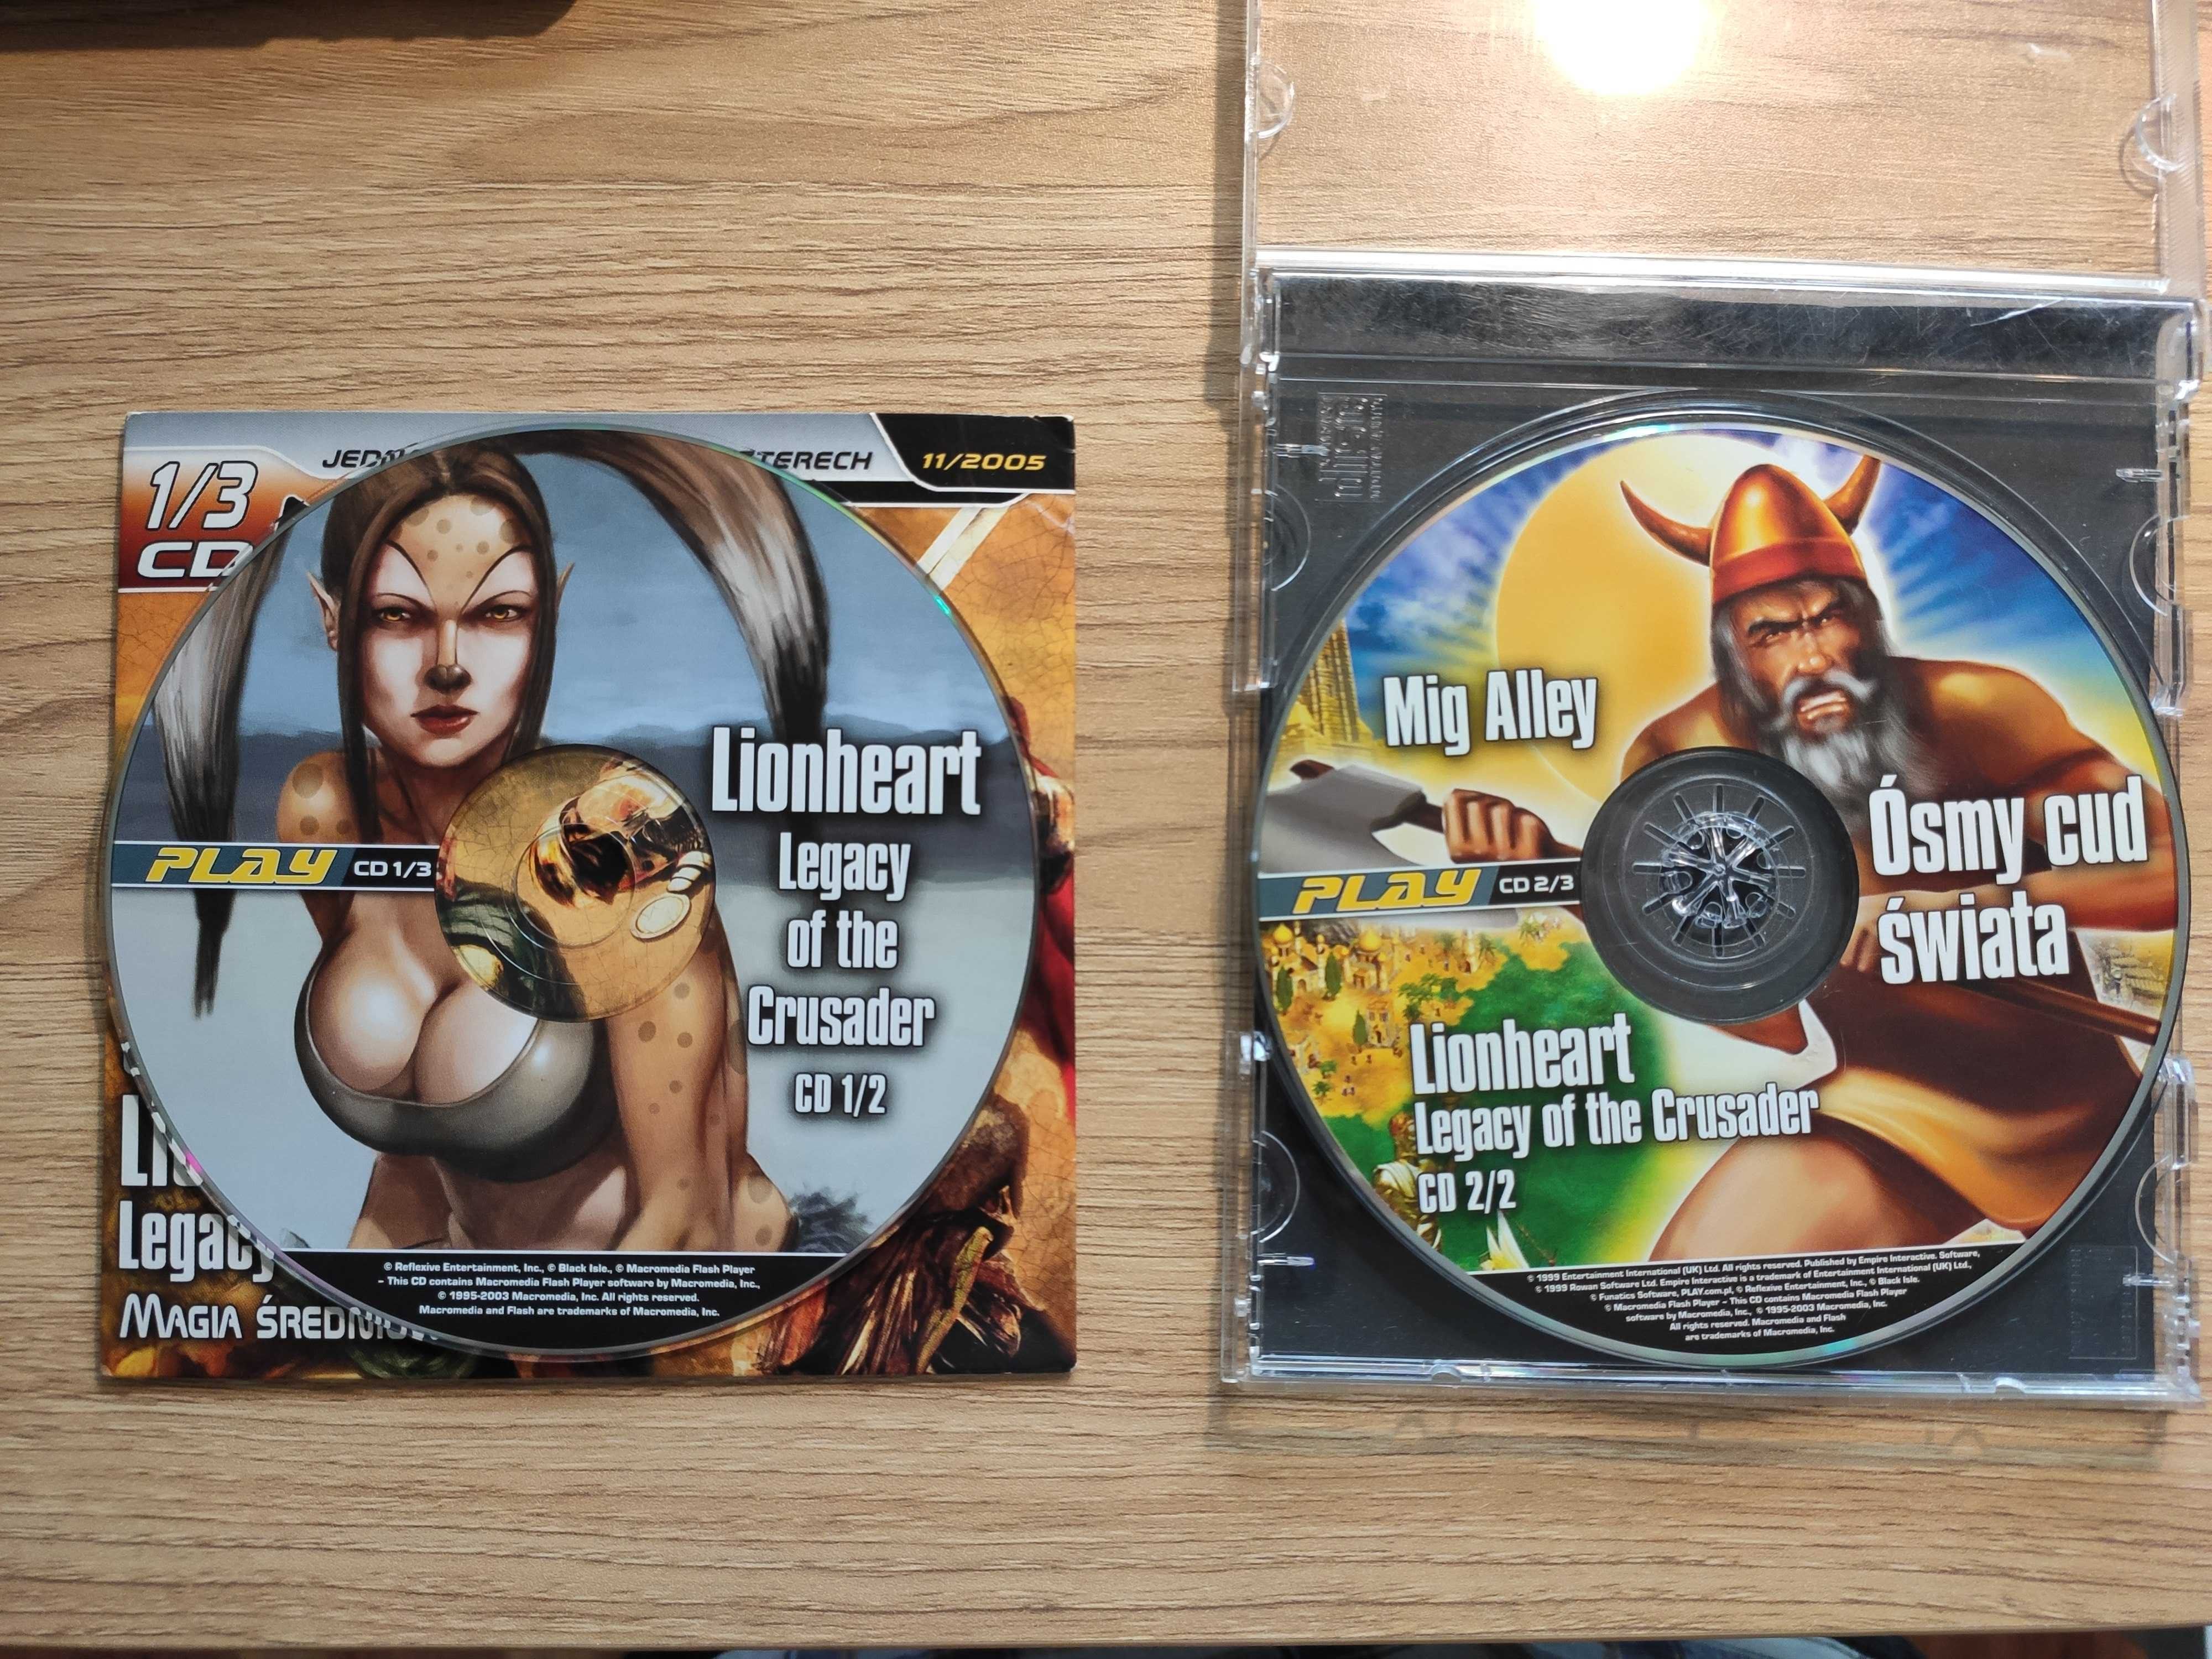 Lionheart Legacy of the crusader - gra PC PLAY 2CD